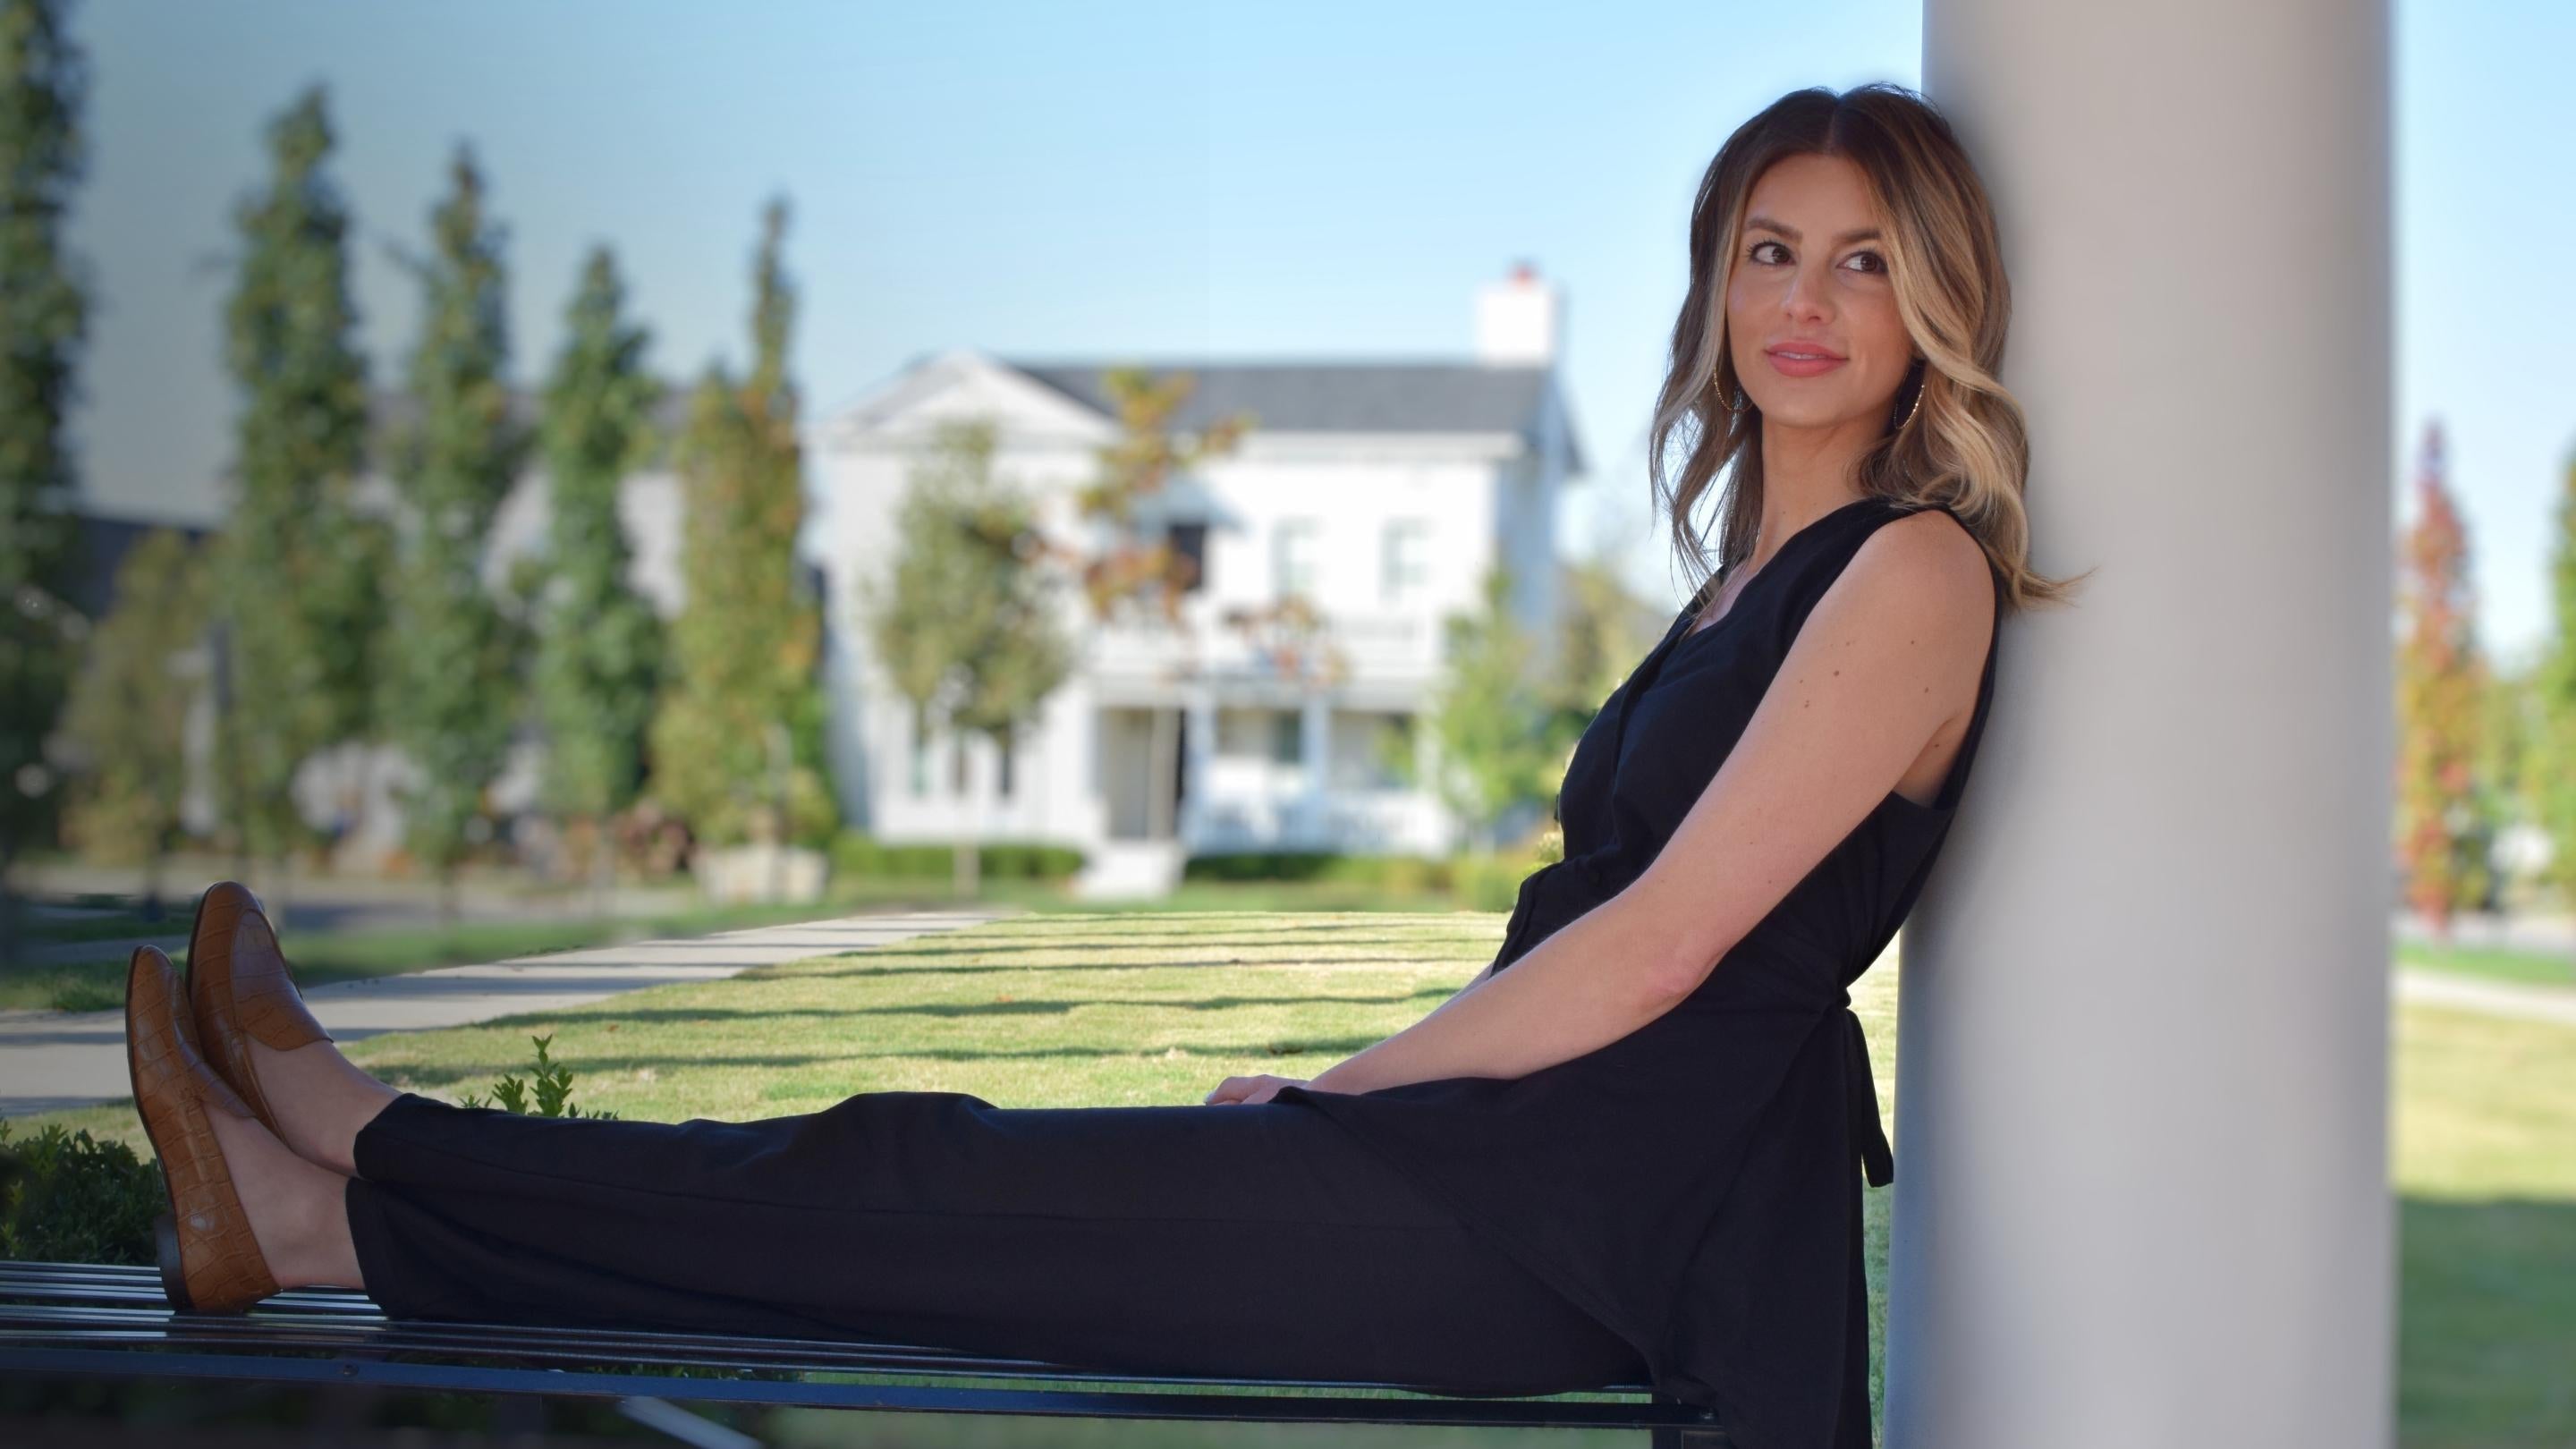 Model sitting on a bench looking to the side wearing a black mastectomy shirt with matching black pants.